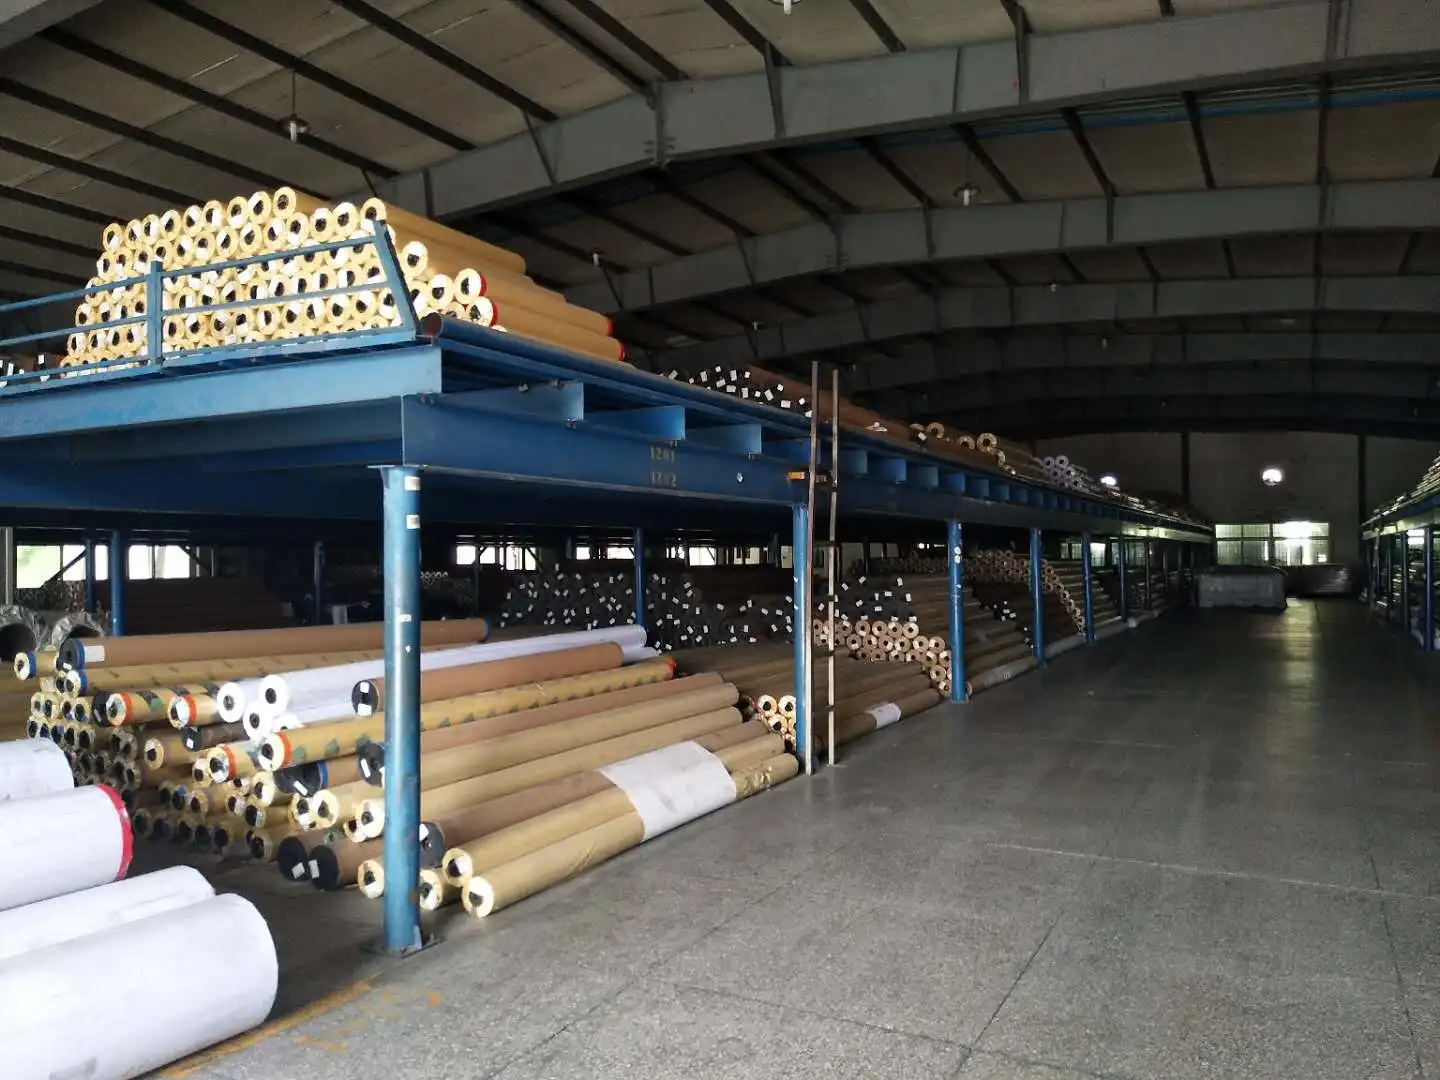 Pvc Coated Tarpaulin Fabric Coated Polyester Fabric Covers and Tent Fabric